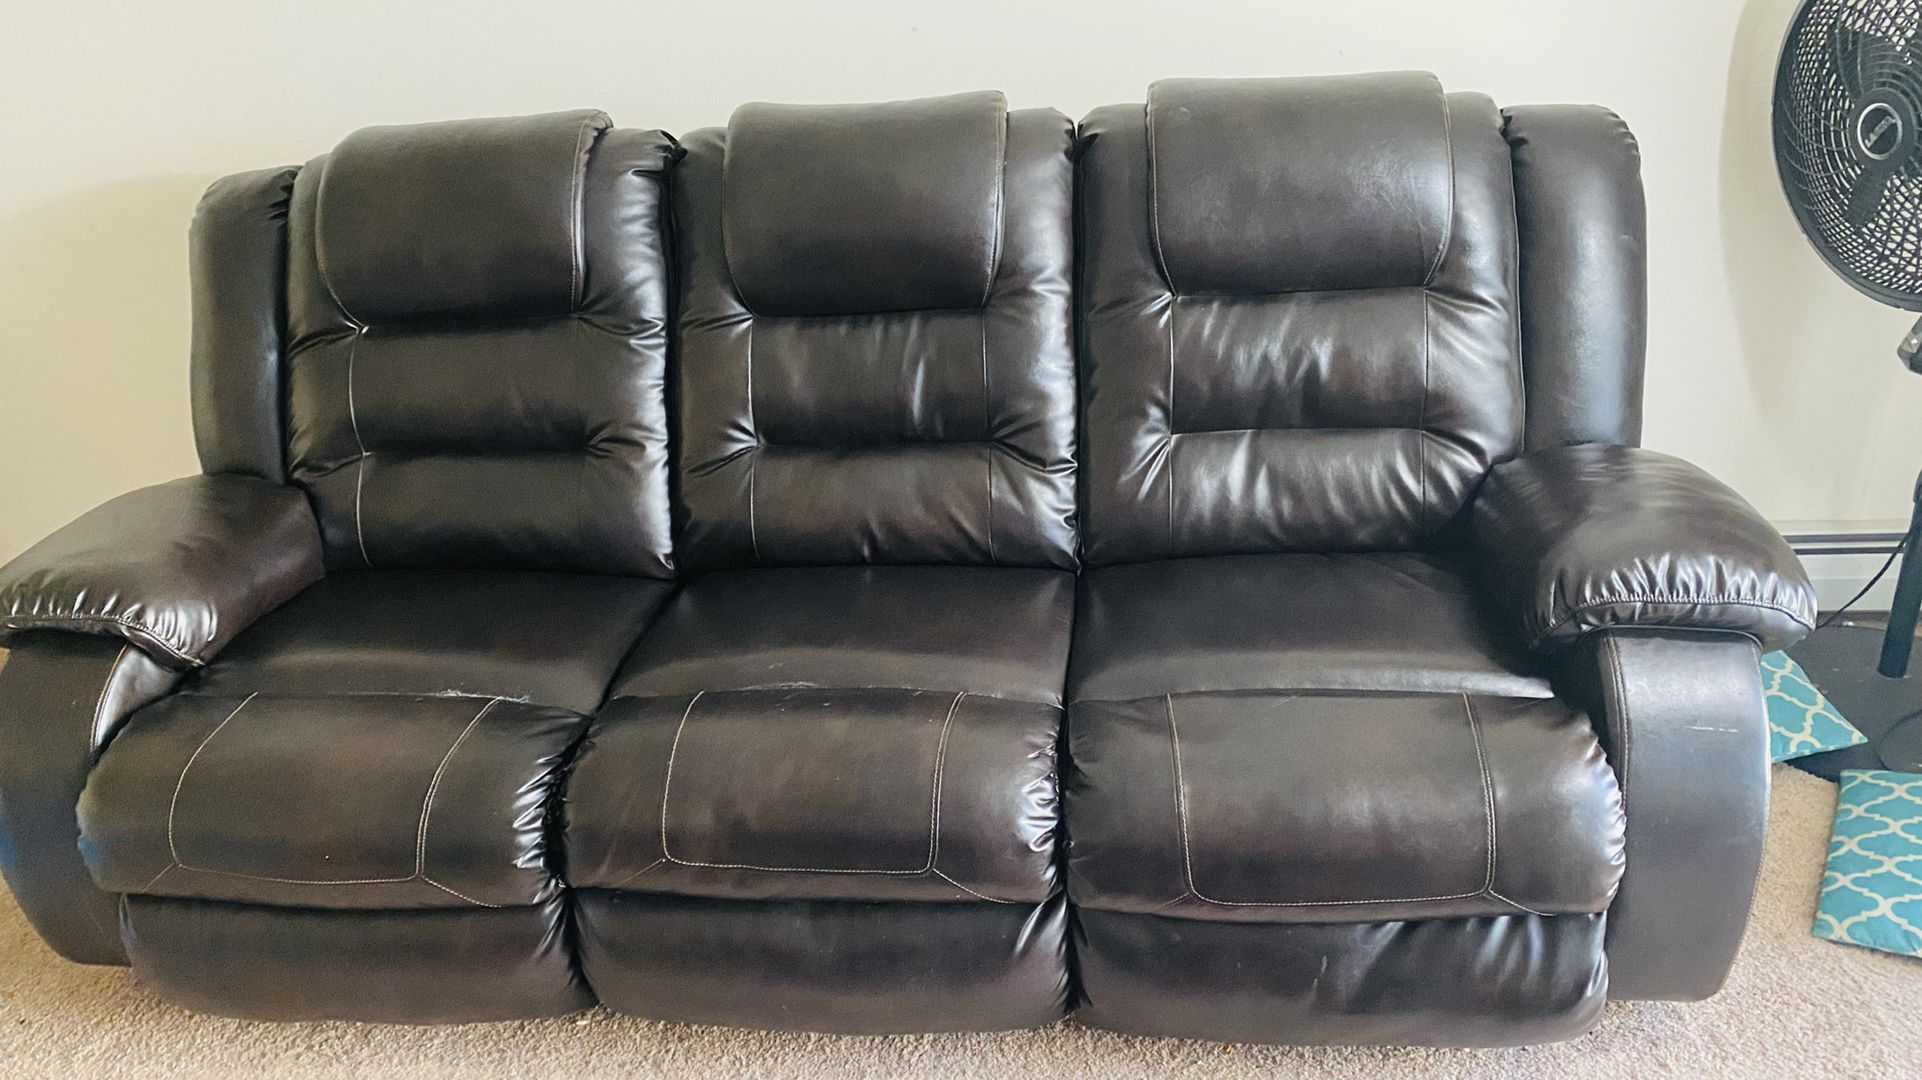 Three Seater Recliner sofa for Sale 